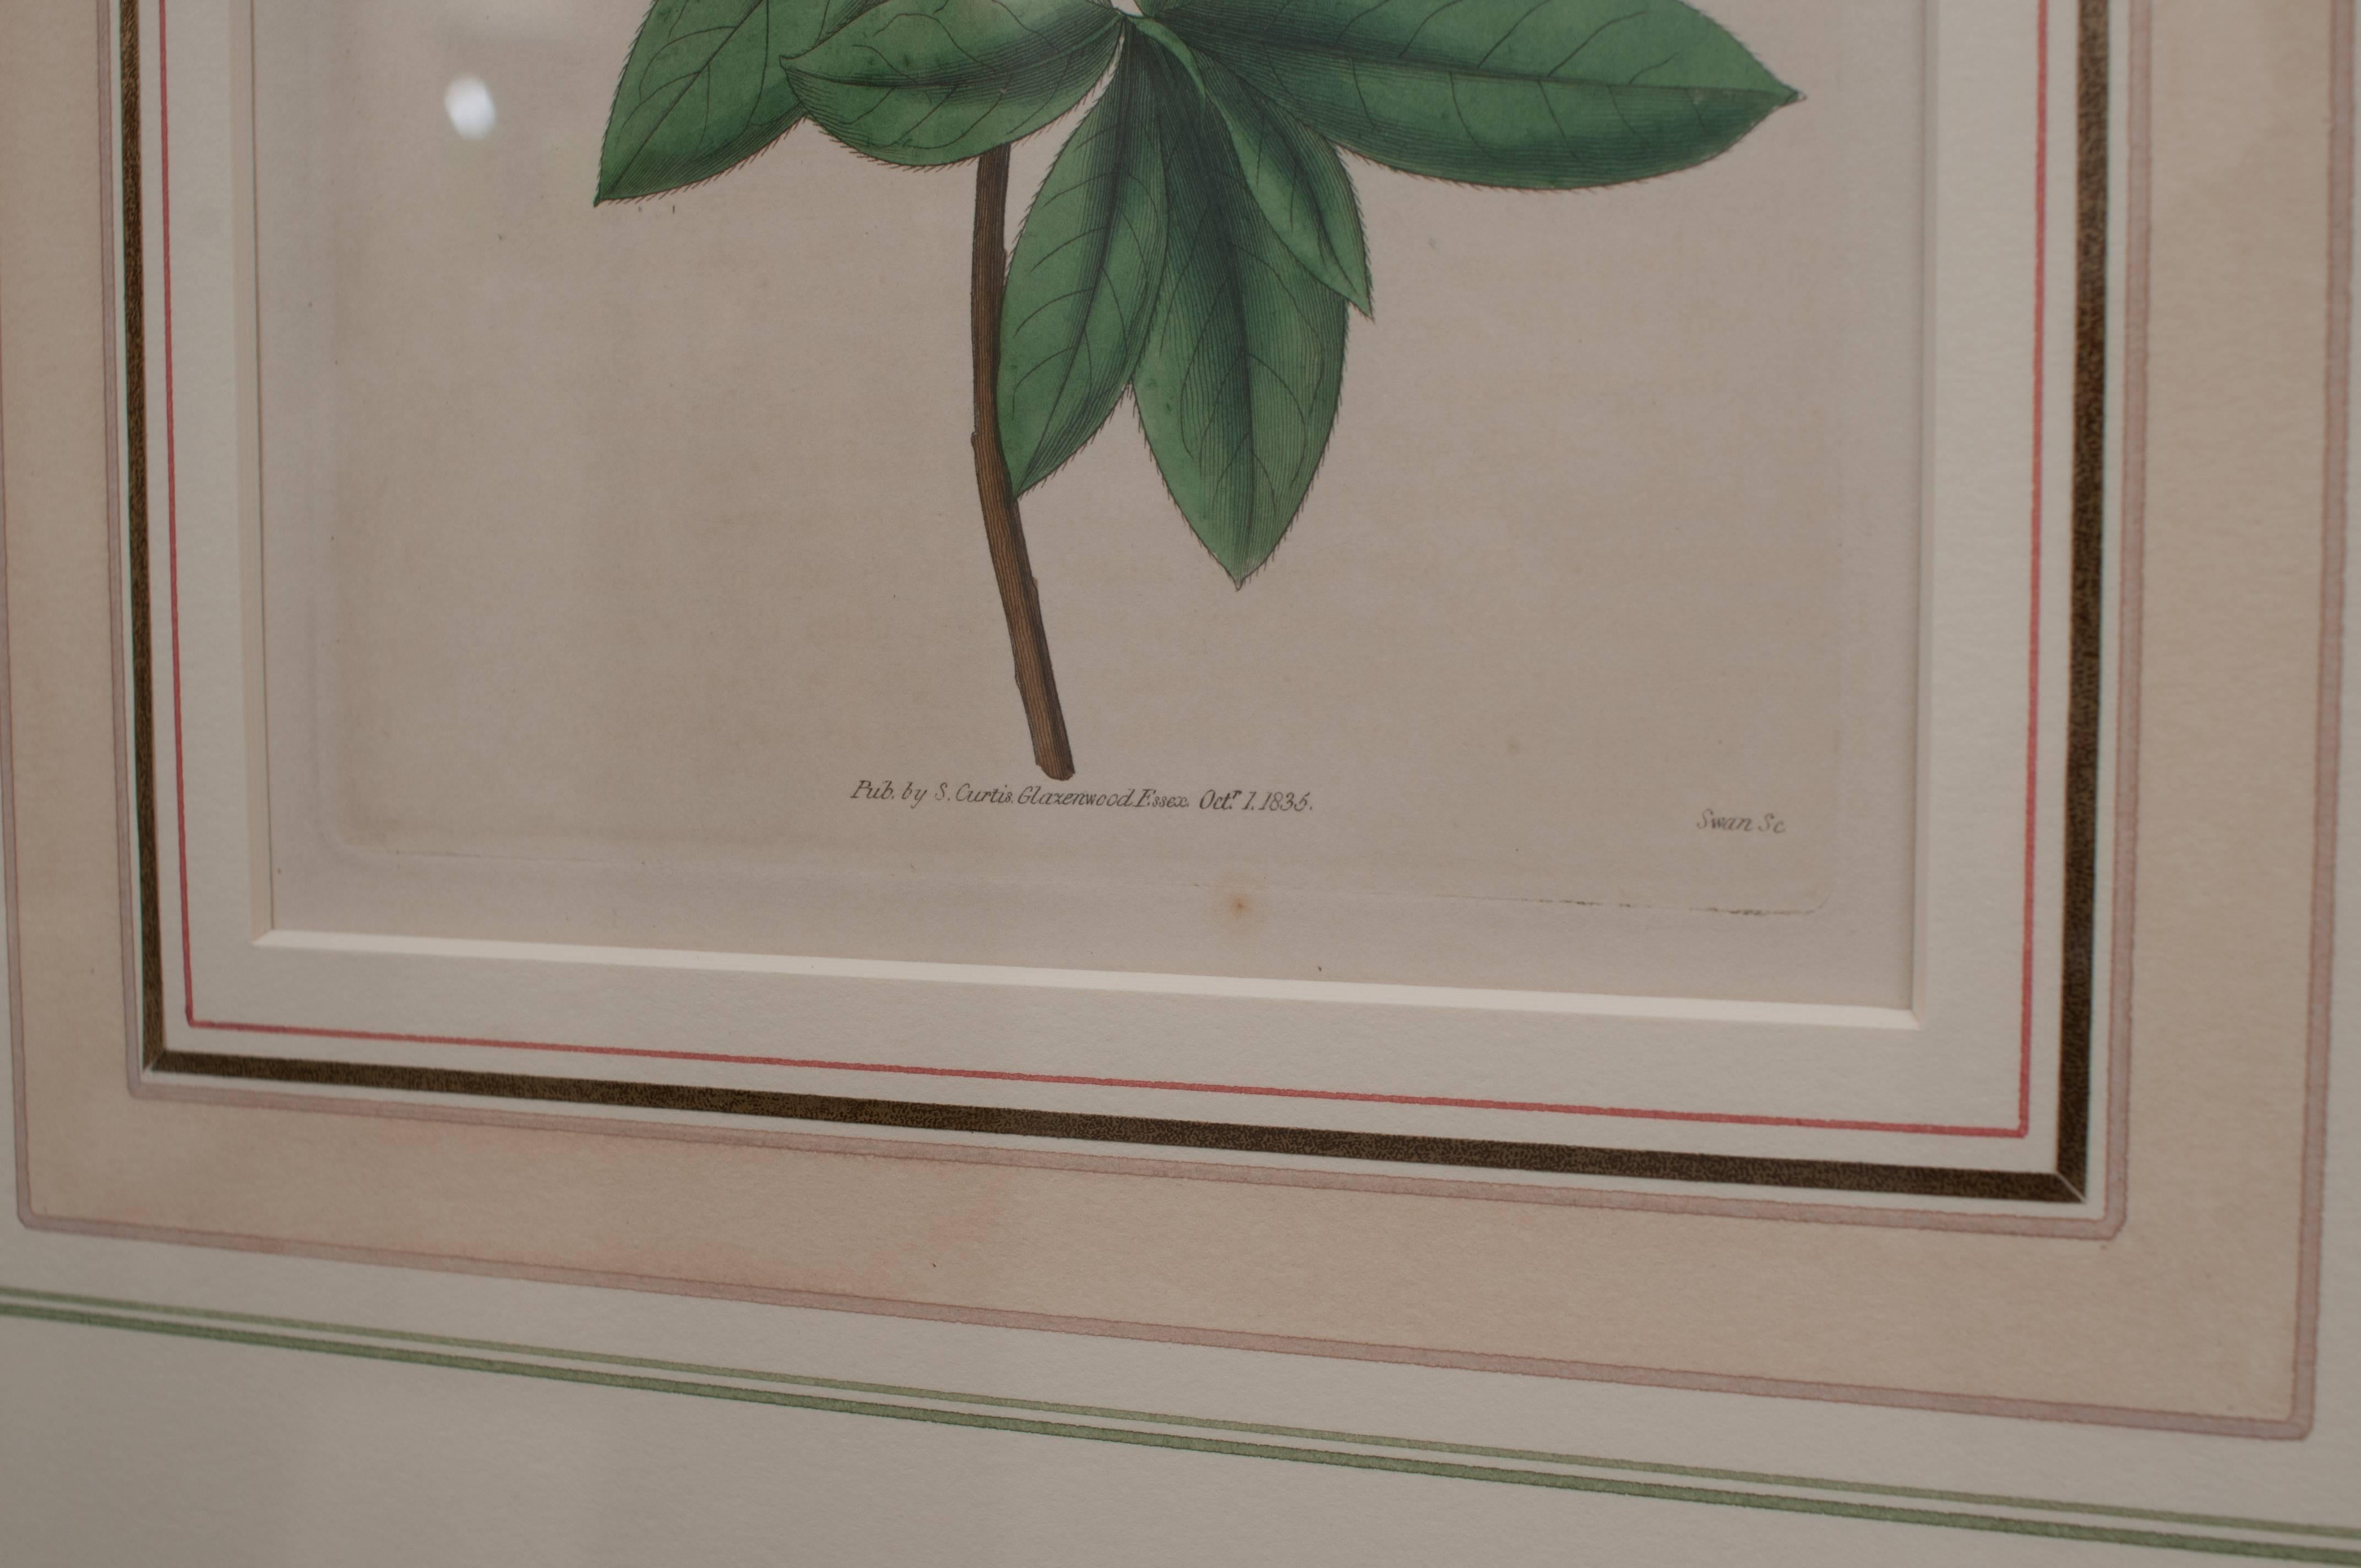 Probably England -- plate #285 - Tulip; plate #3439 - lily; (dated 1835). Beautifully framed and matted in Philadelphia by Ursula Hobson, very fine gold framing with foliate painted decoration.